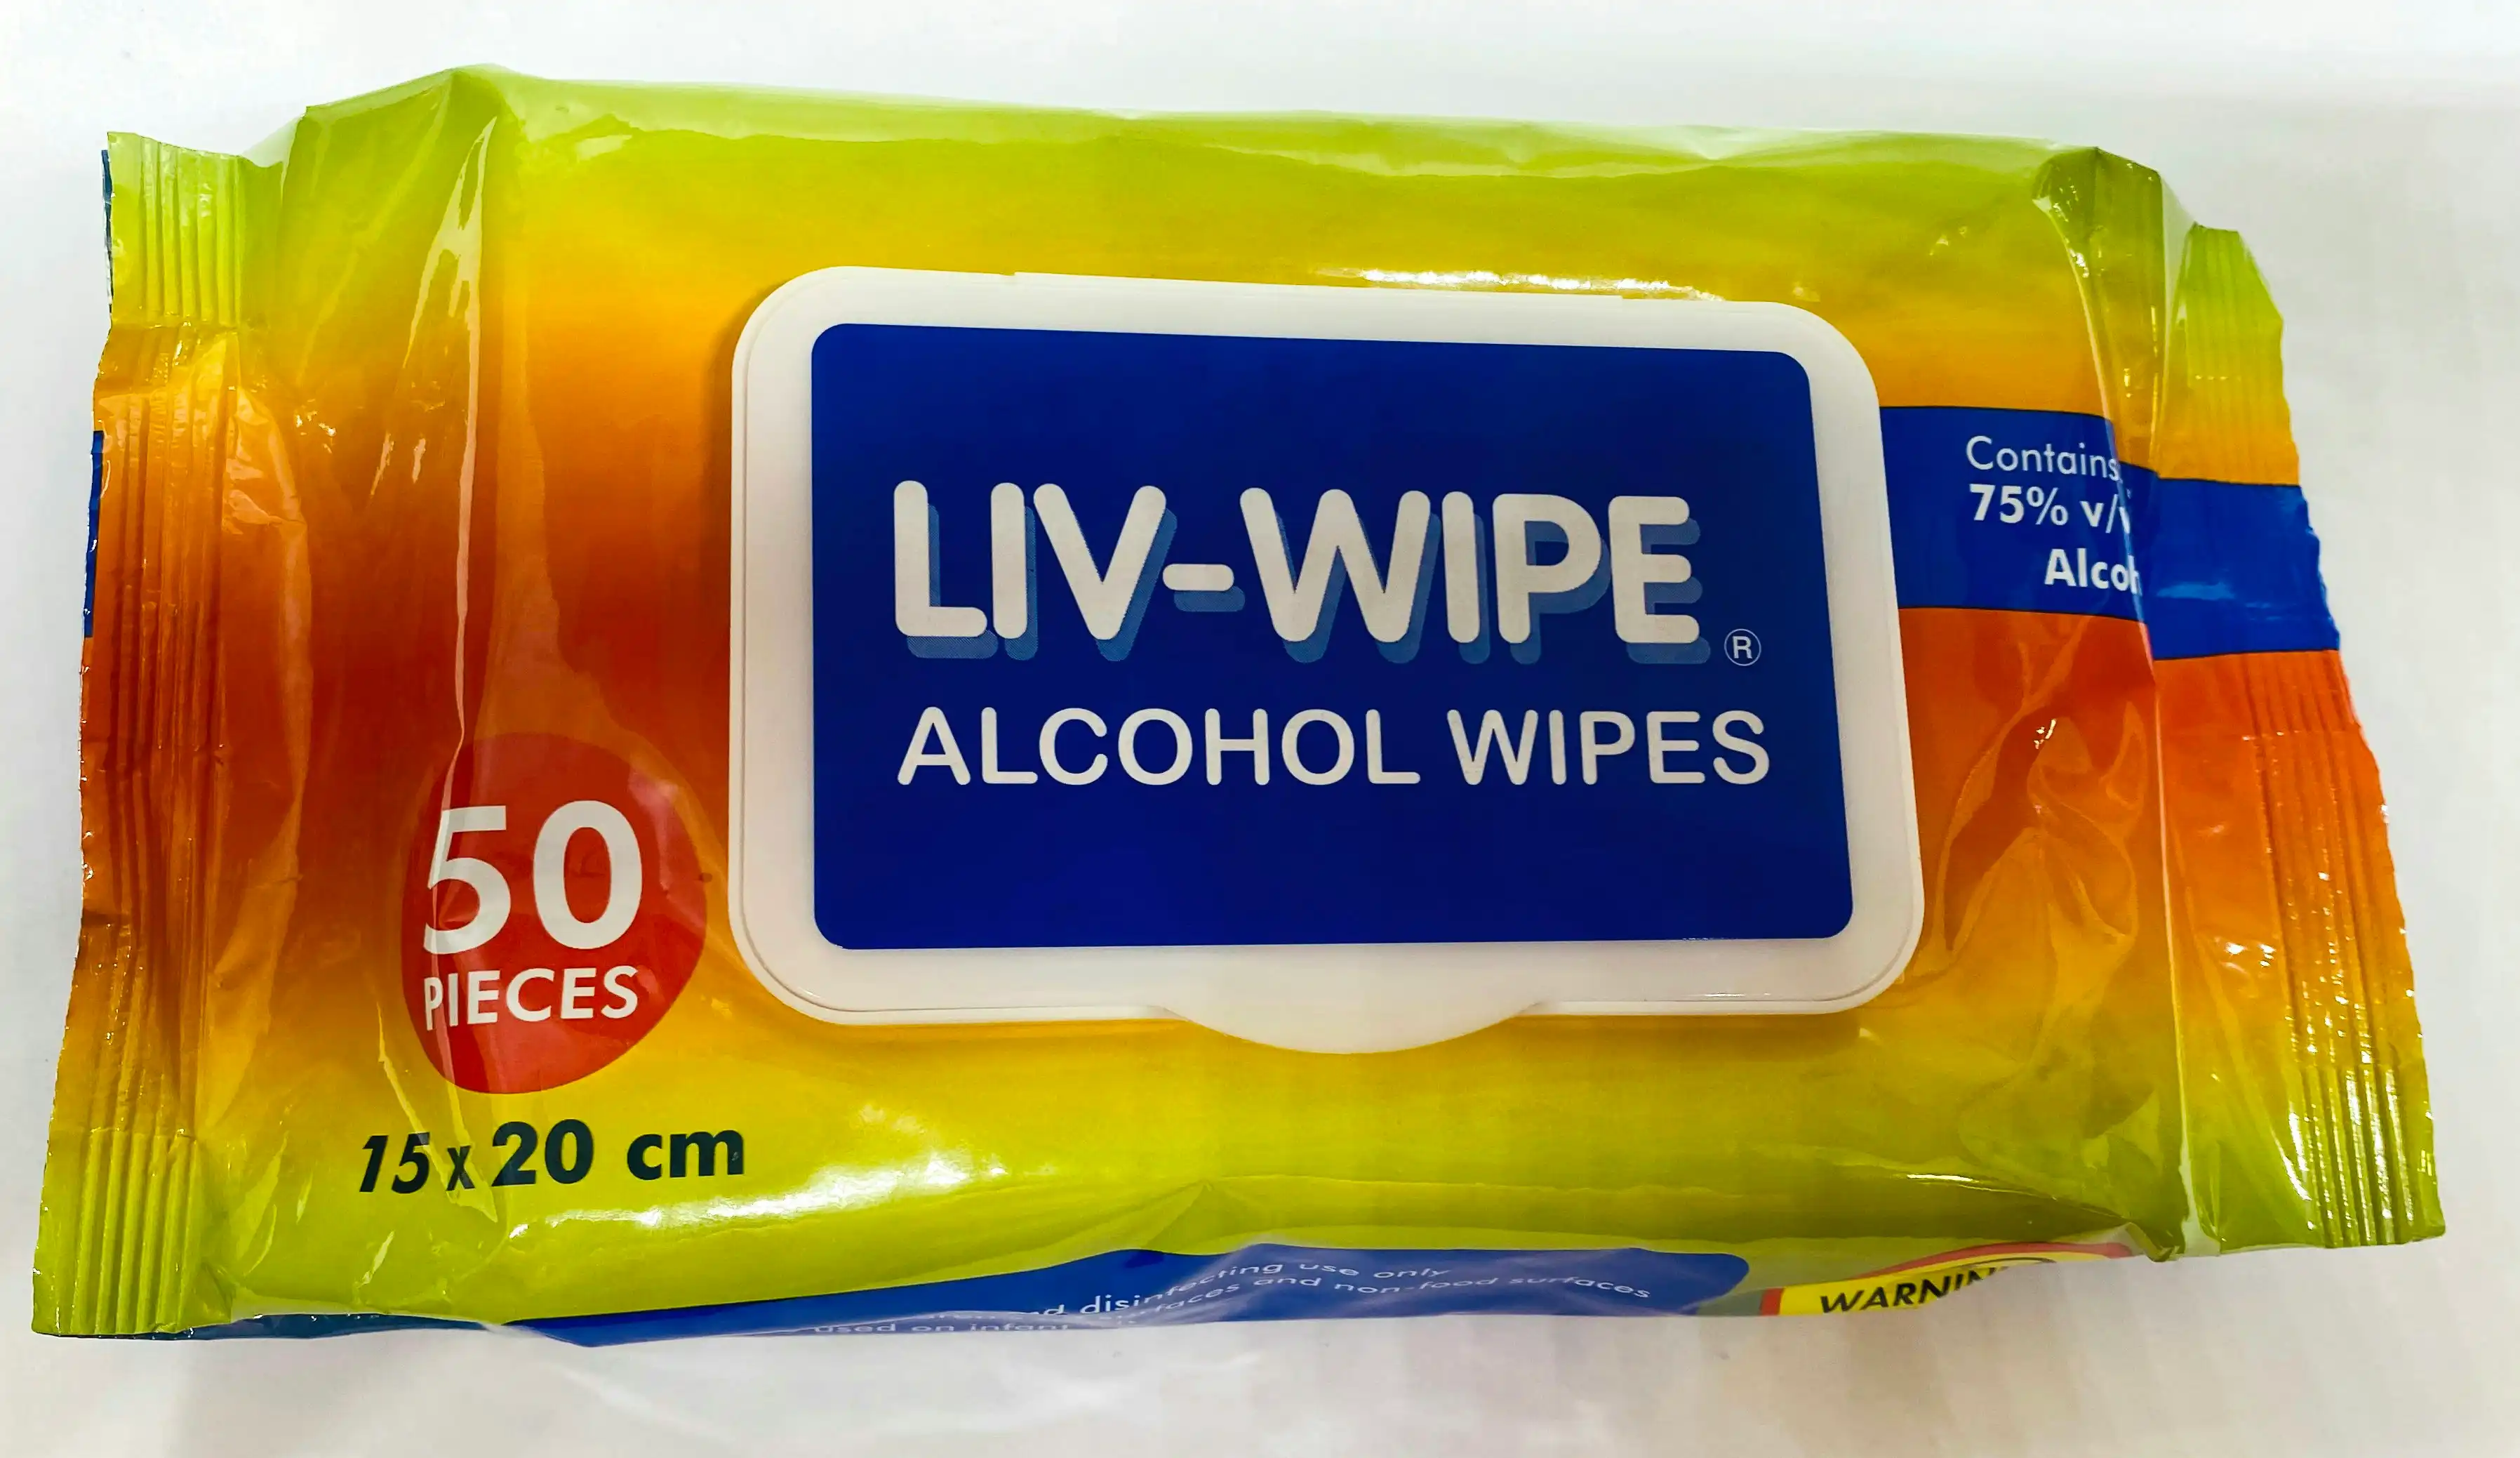 Liv-Wipe Nonwoven Antibacterial 75% Ethyl Alcohol Sanitiser Wipes 50 Pack